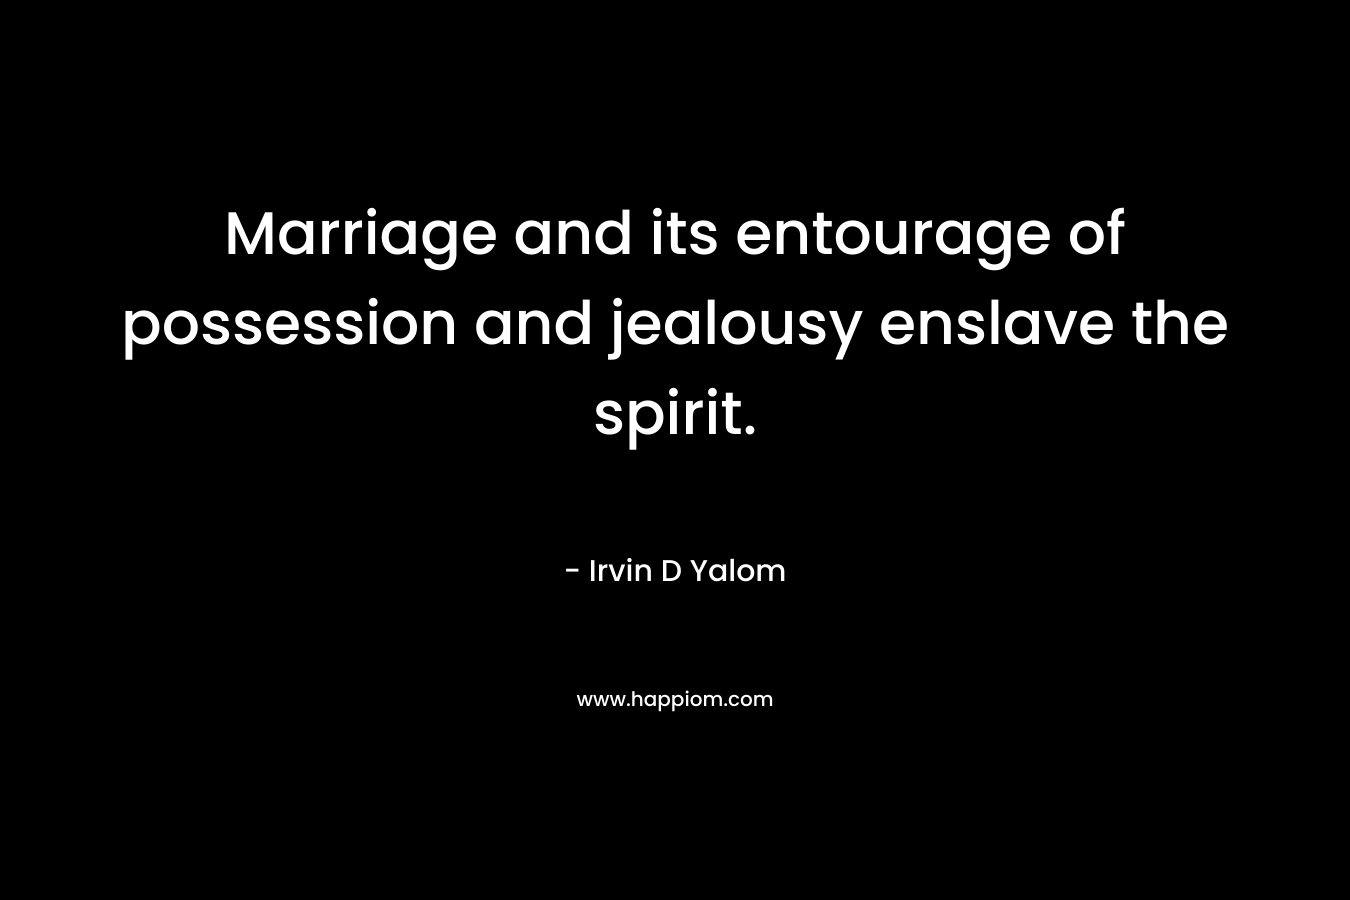 Marriage and its entourage of possession and jealousy enslave the spirit.